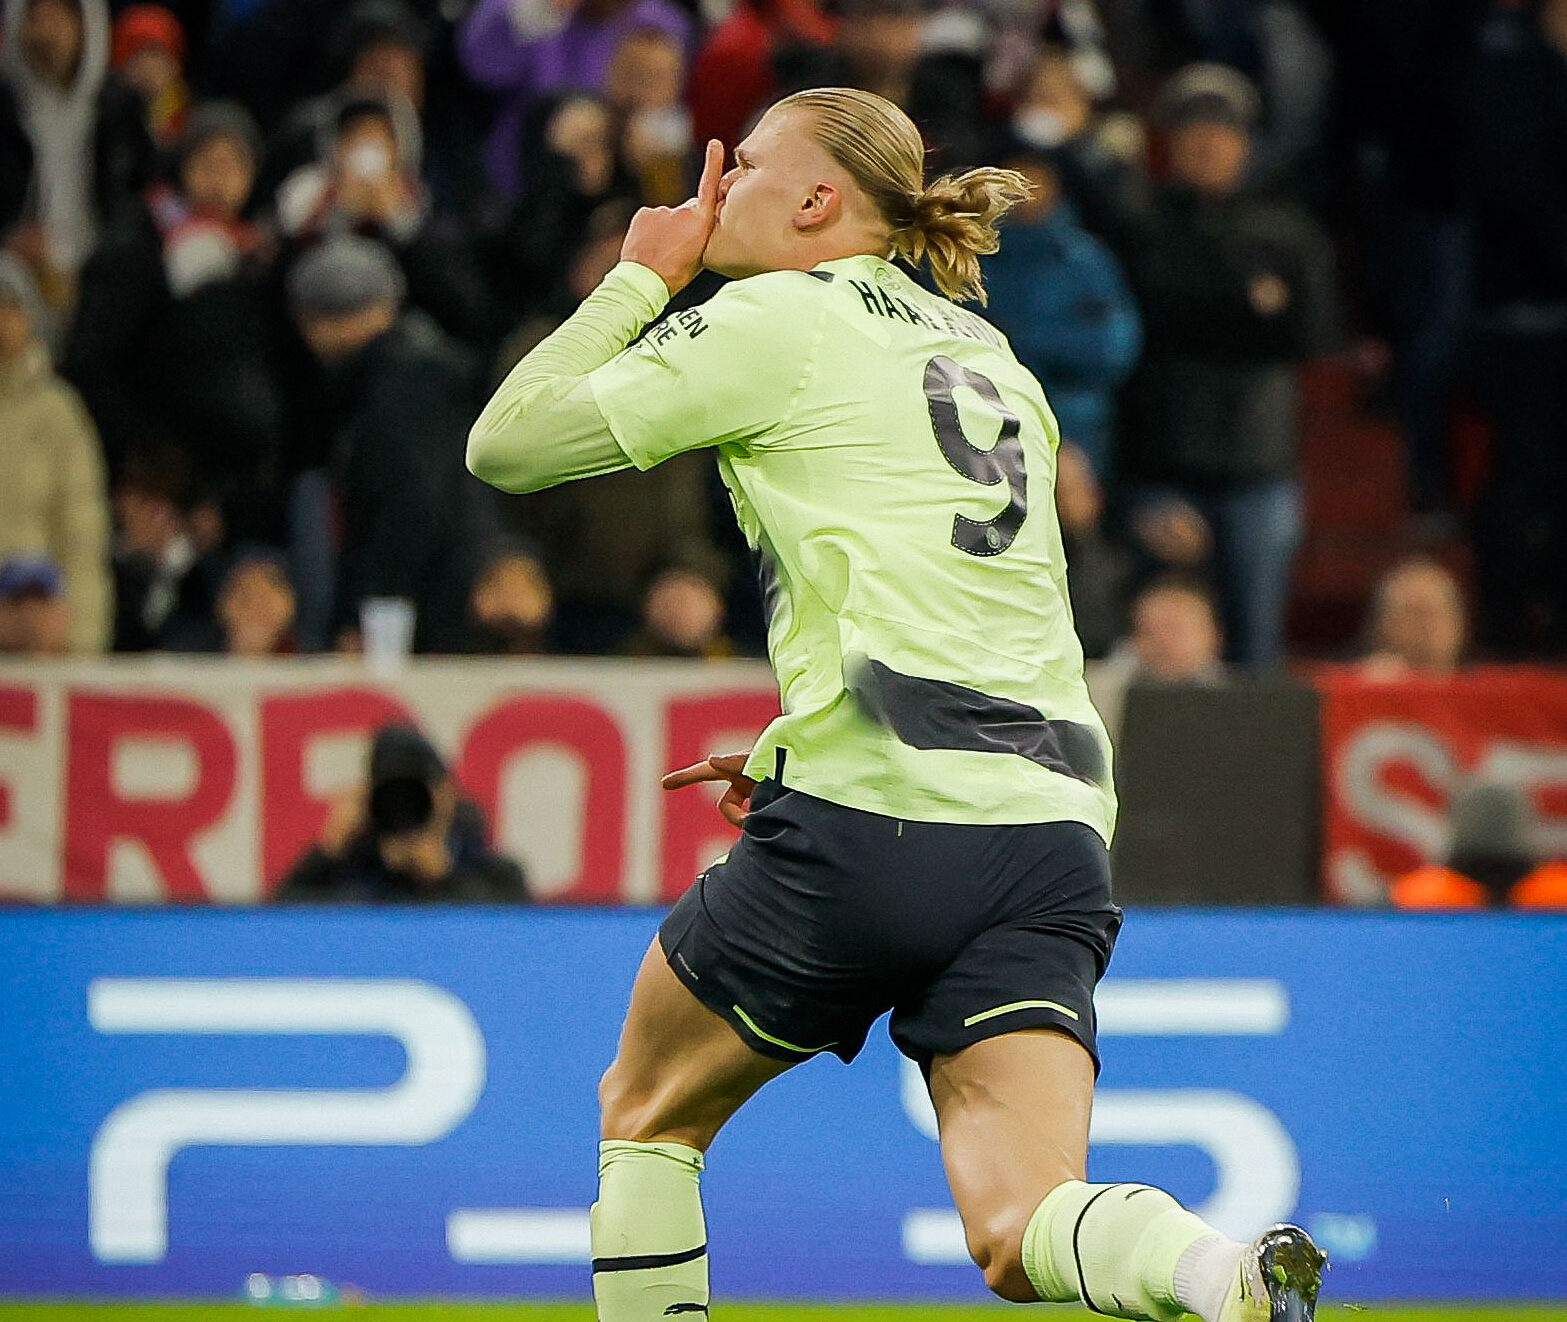 Haaland becomes youngest player to score 35 goals in UEFA Champions League